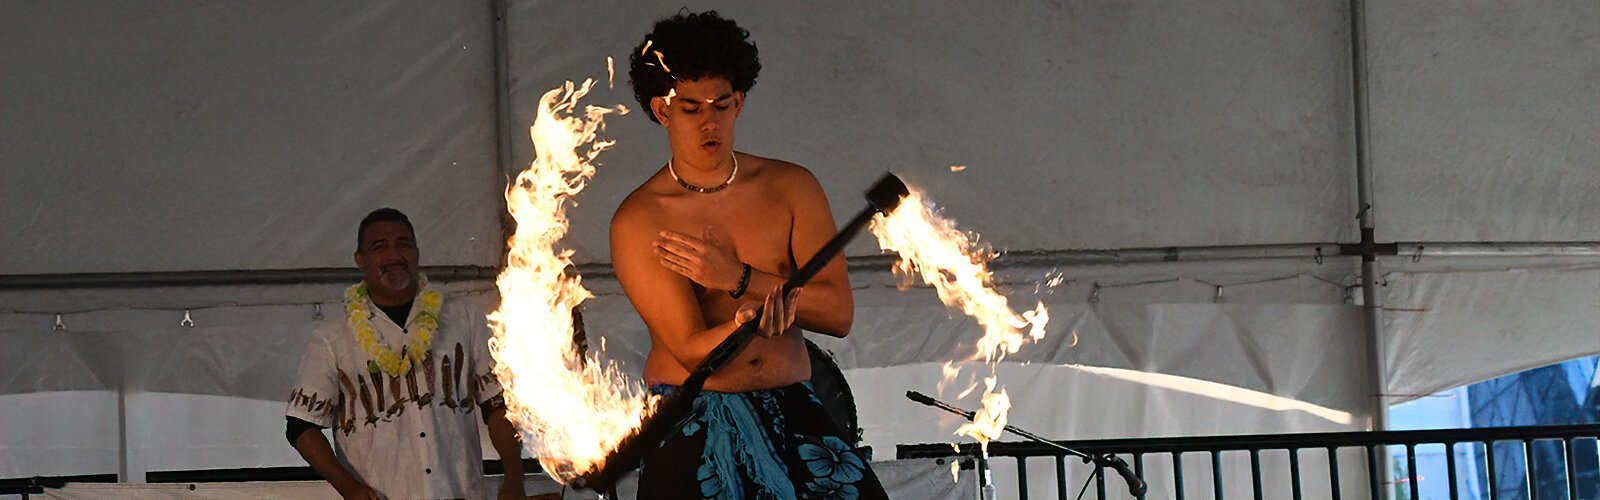 From Echo of the South Pacific, a young man displays his fire handling skills on stage.